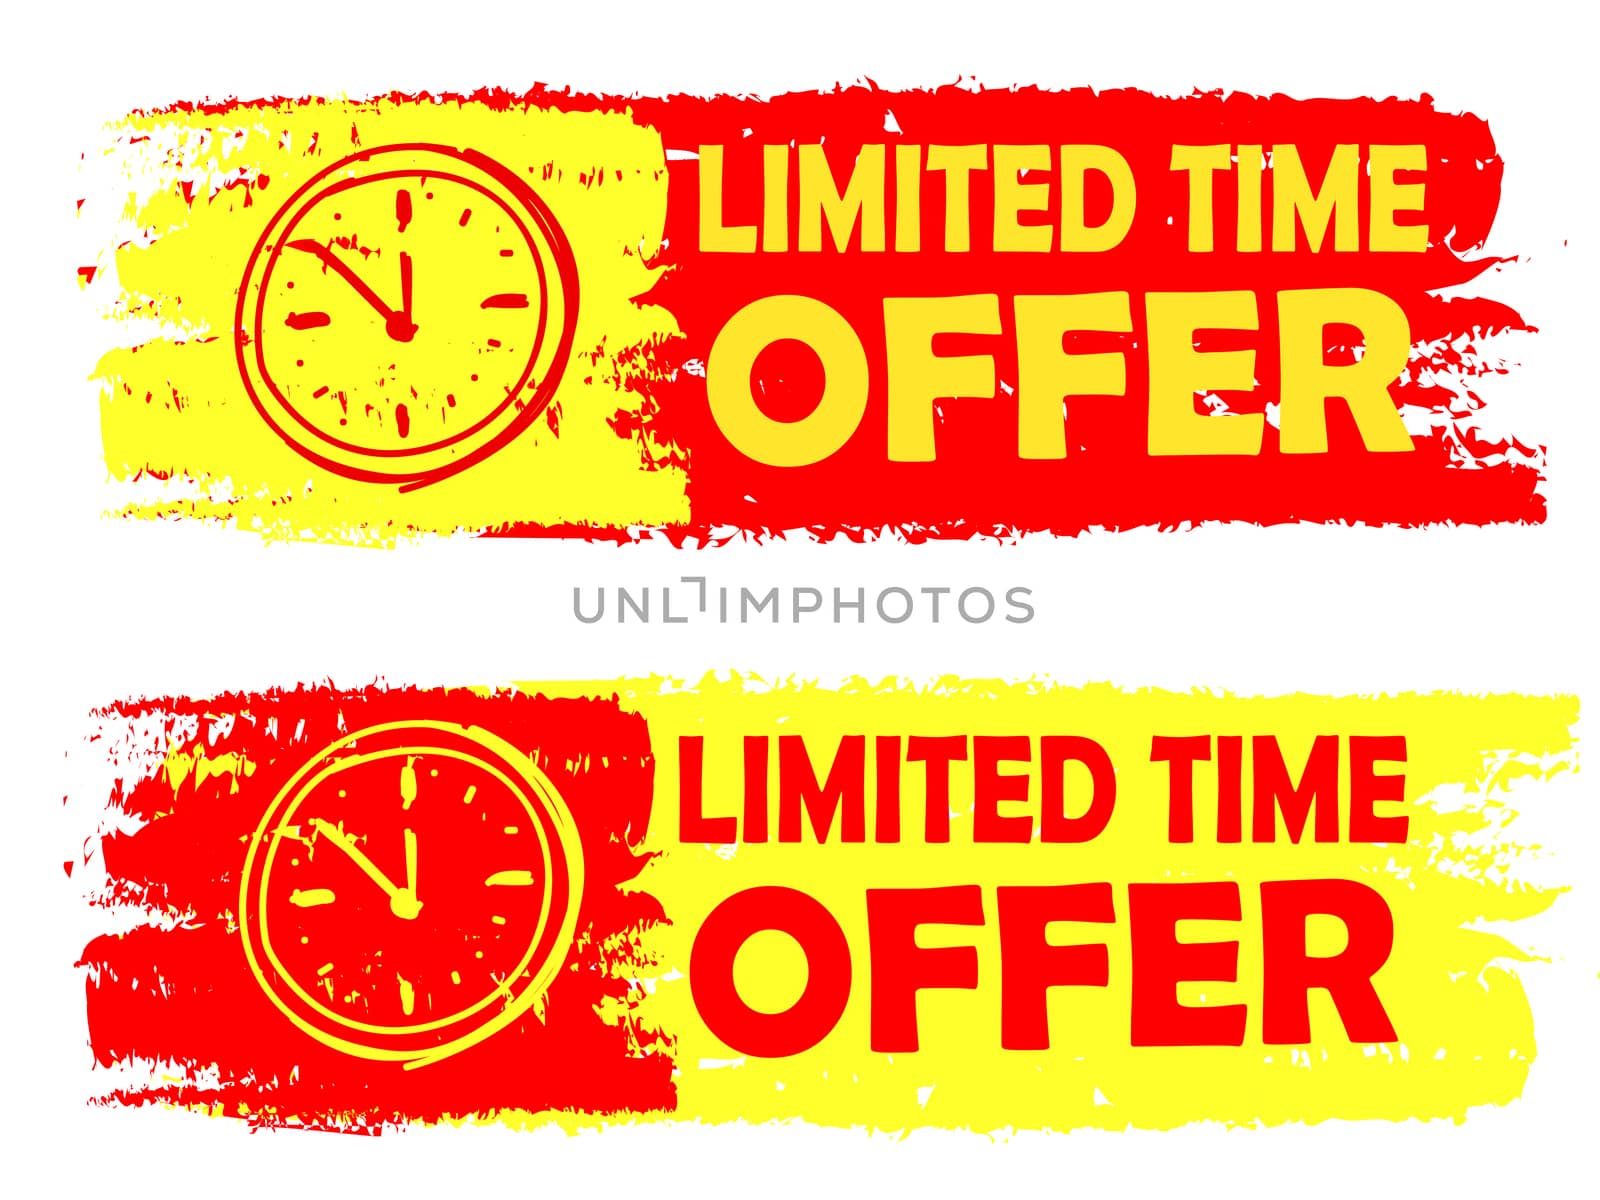 limited time offer with clock signs banners - text in yellow and red drawn labels with symbols, business commerce shopping concept